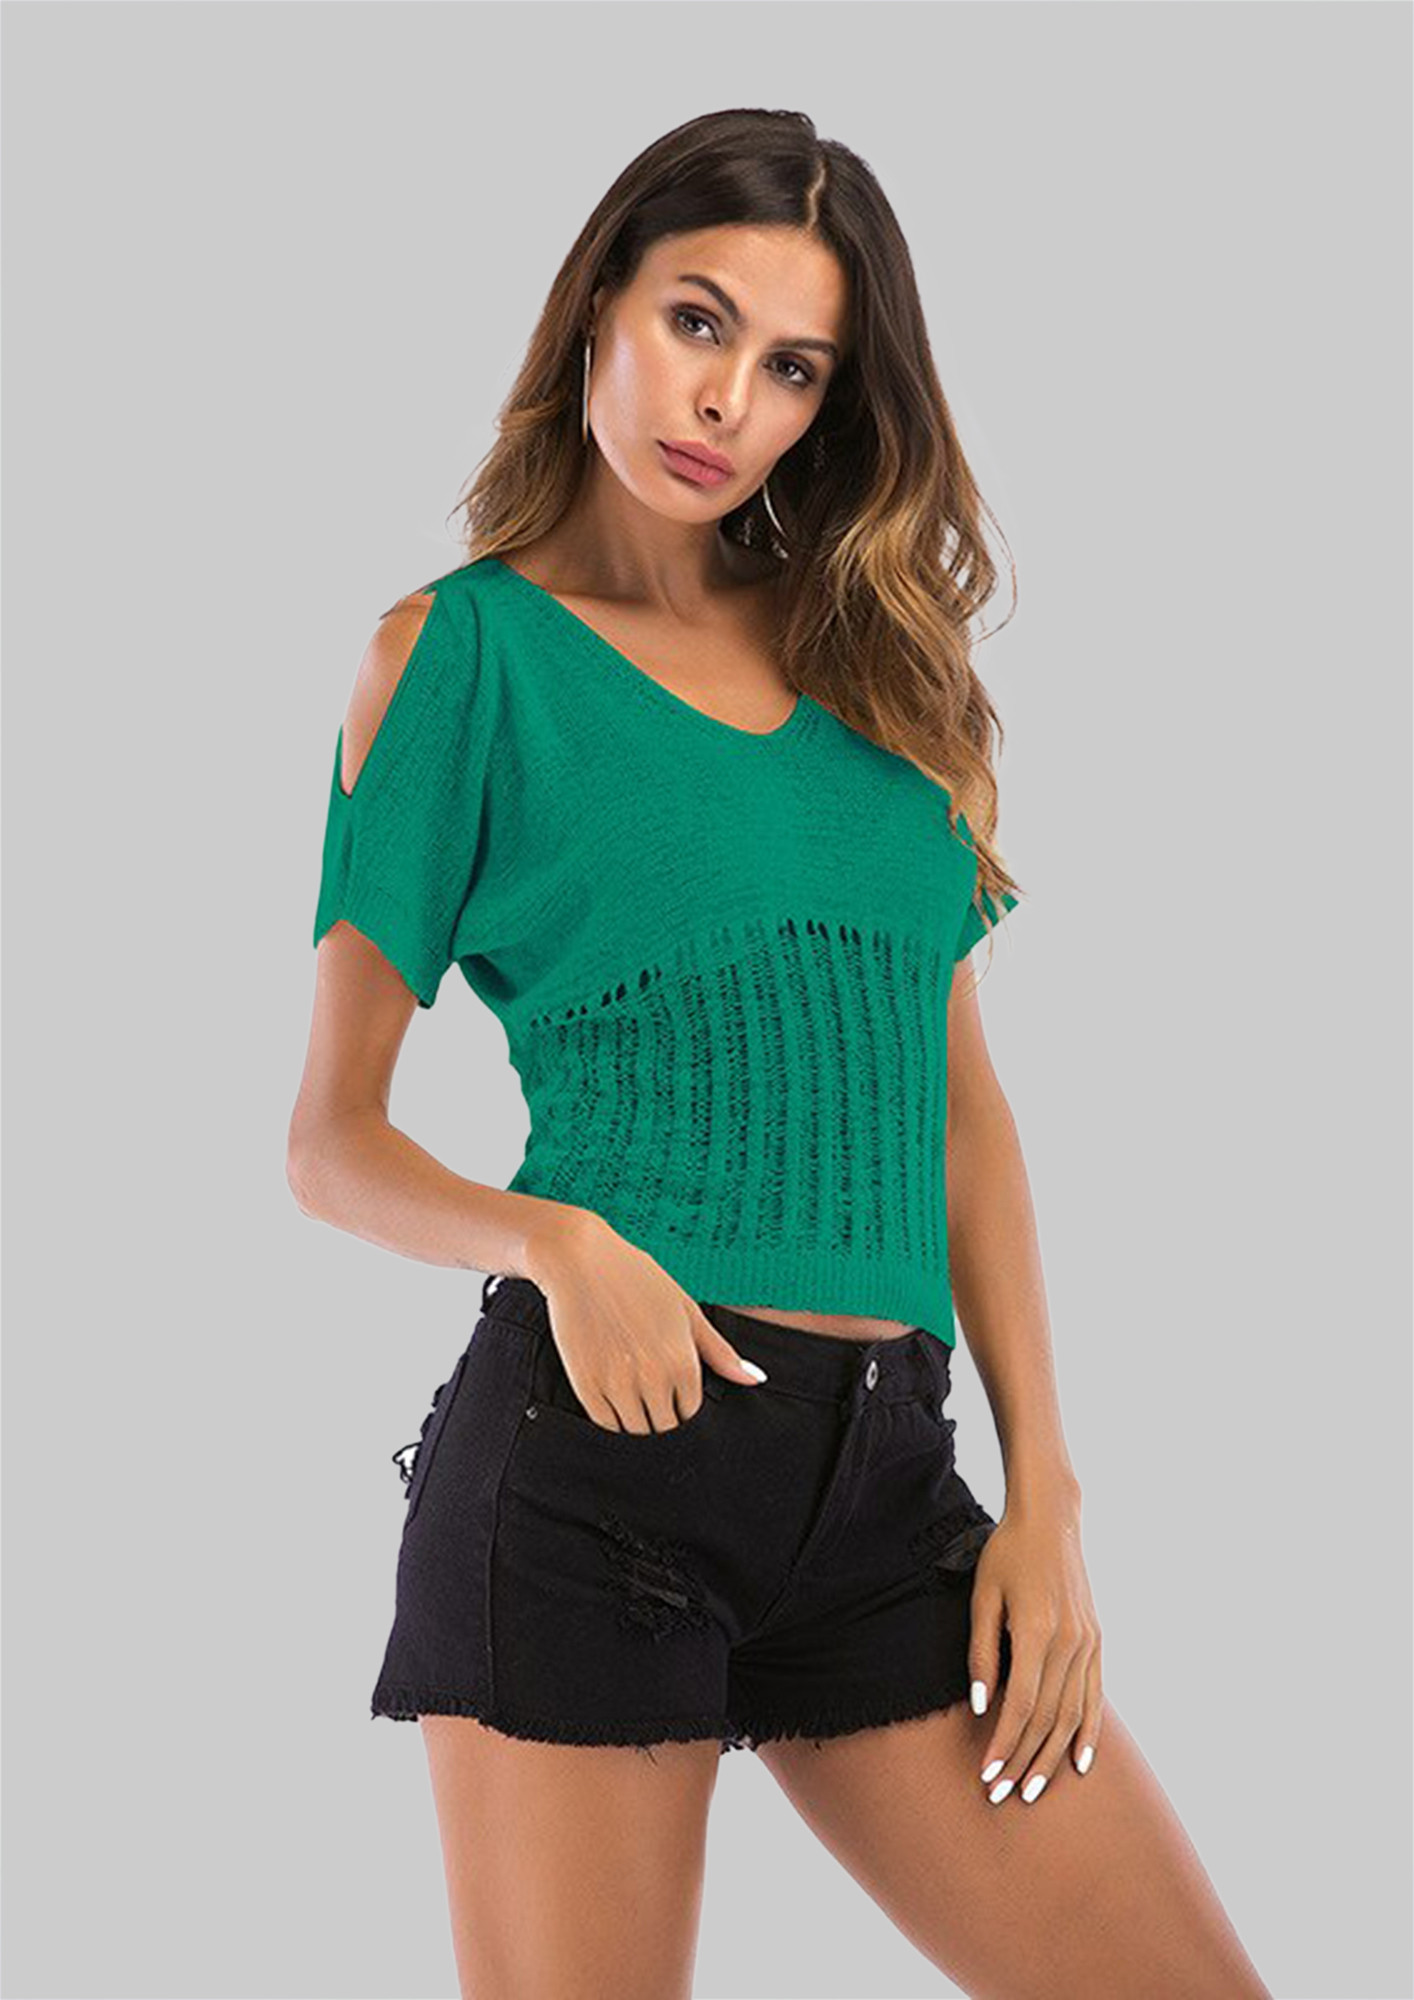 IN A CUT-OUT SLEEVE DETAIL GREEN T-SHIRT TOP